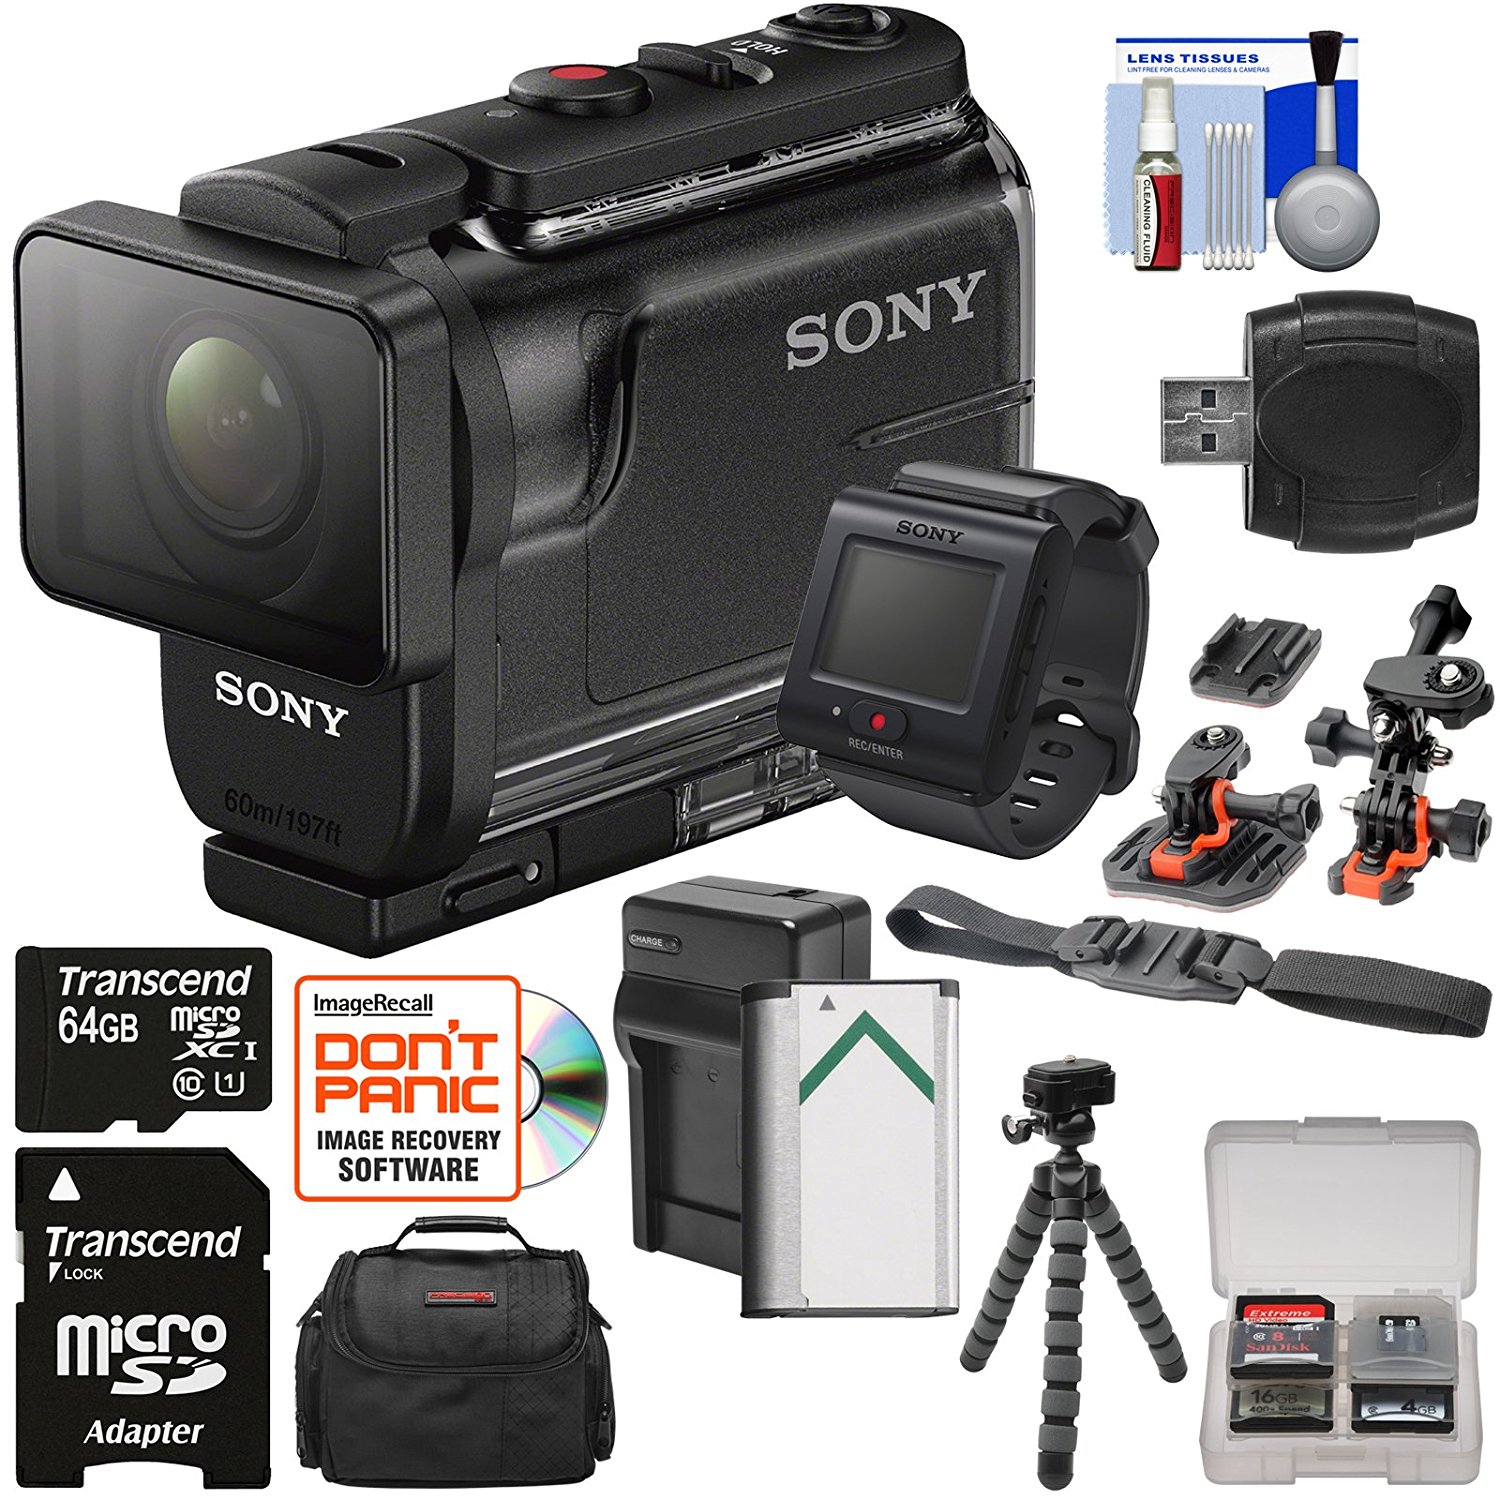 Sony Action Cam HDR-AS50R Wi-Fi HD Video Camera Camcorder & Live View Remote + 64GB Card + Battery/Charger + Case + Tripod + Flat Surface & 2 Helmet Mounts Kit